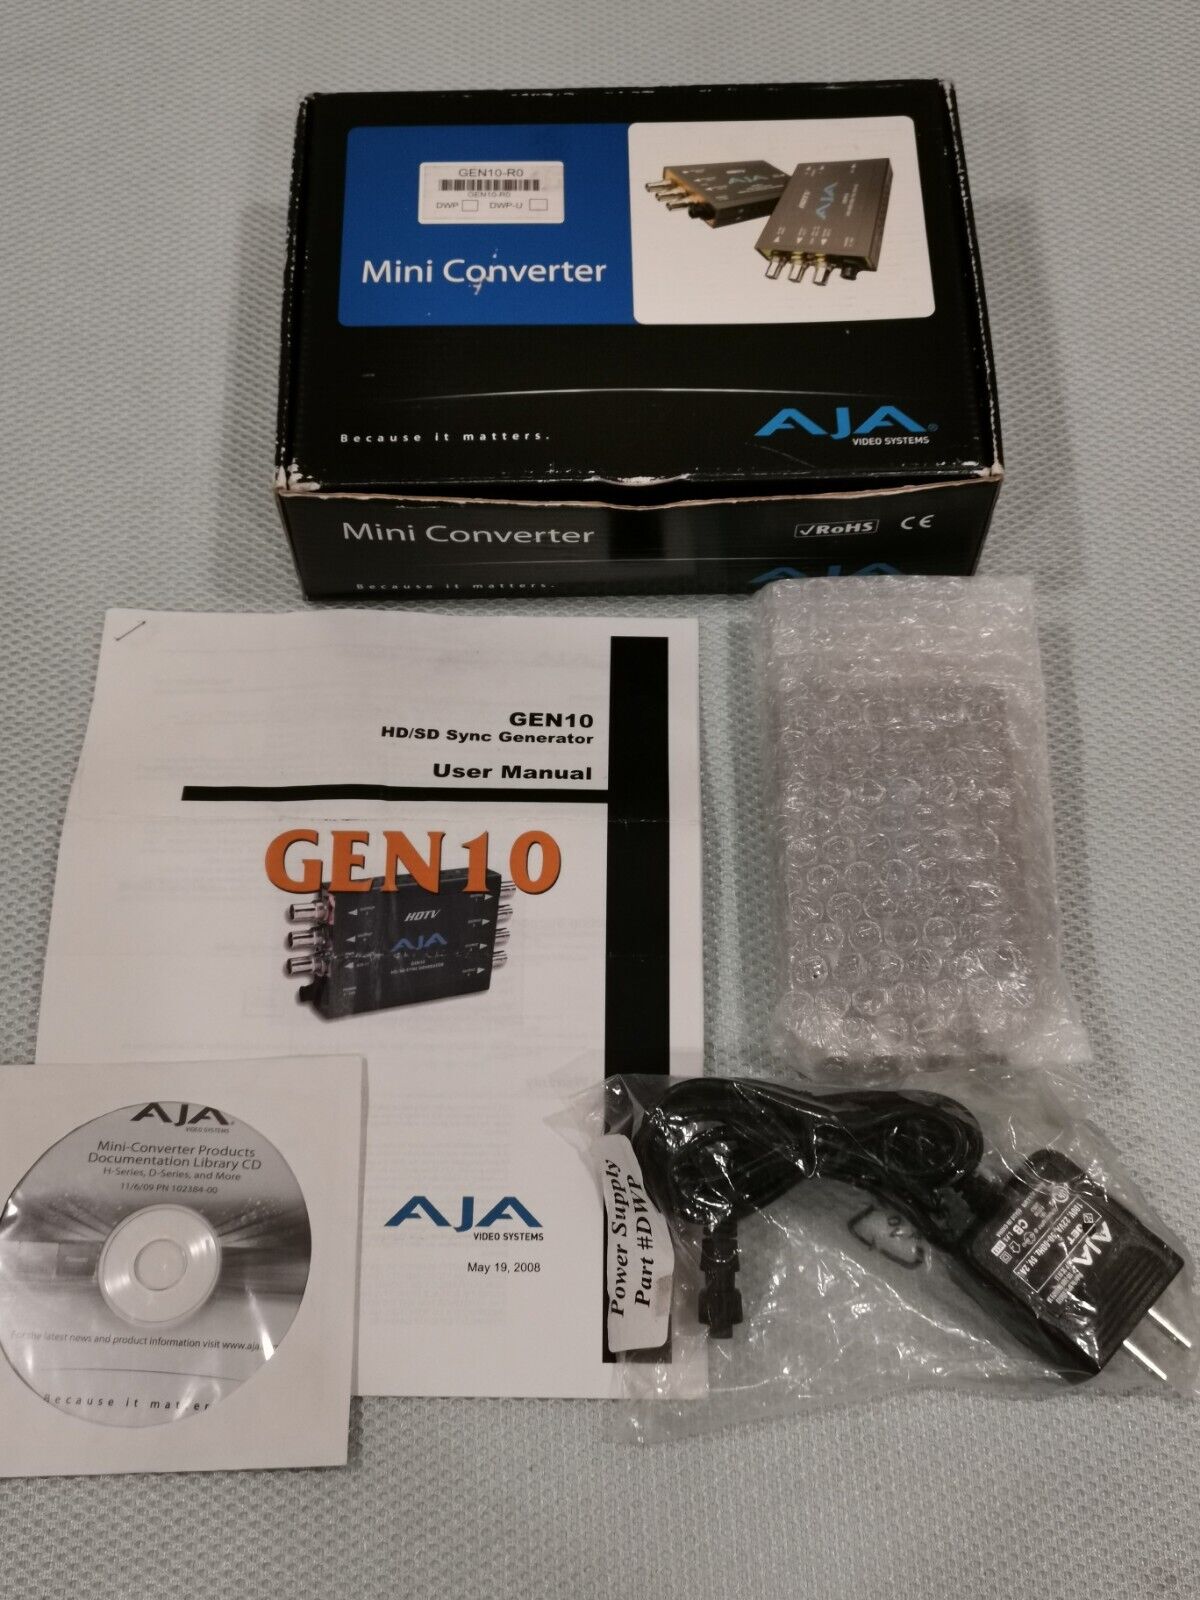 Aja Gen10 Hd/sd/aes Sync Generator Boxed Complete